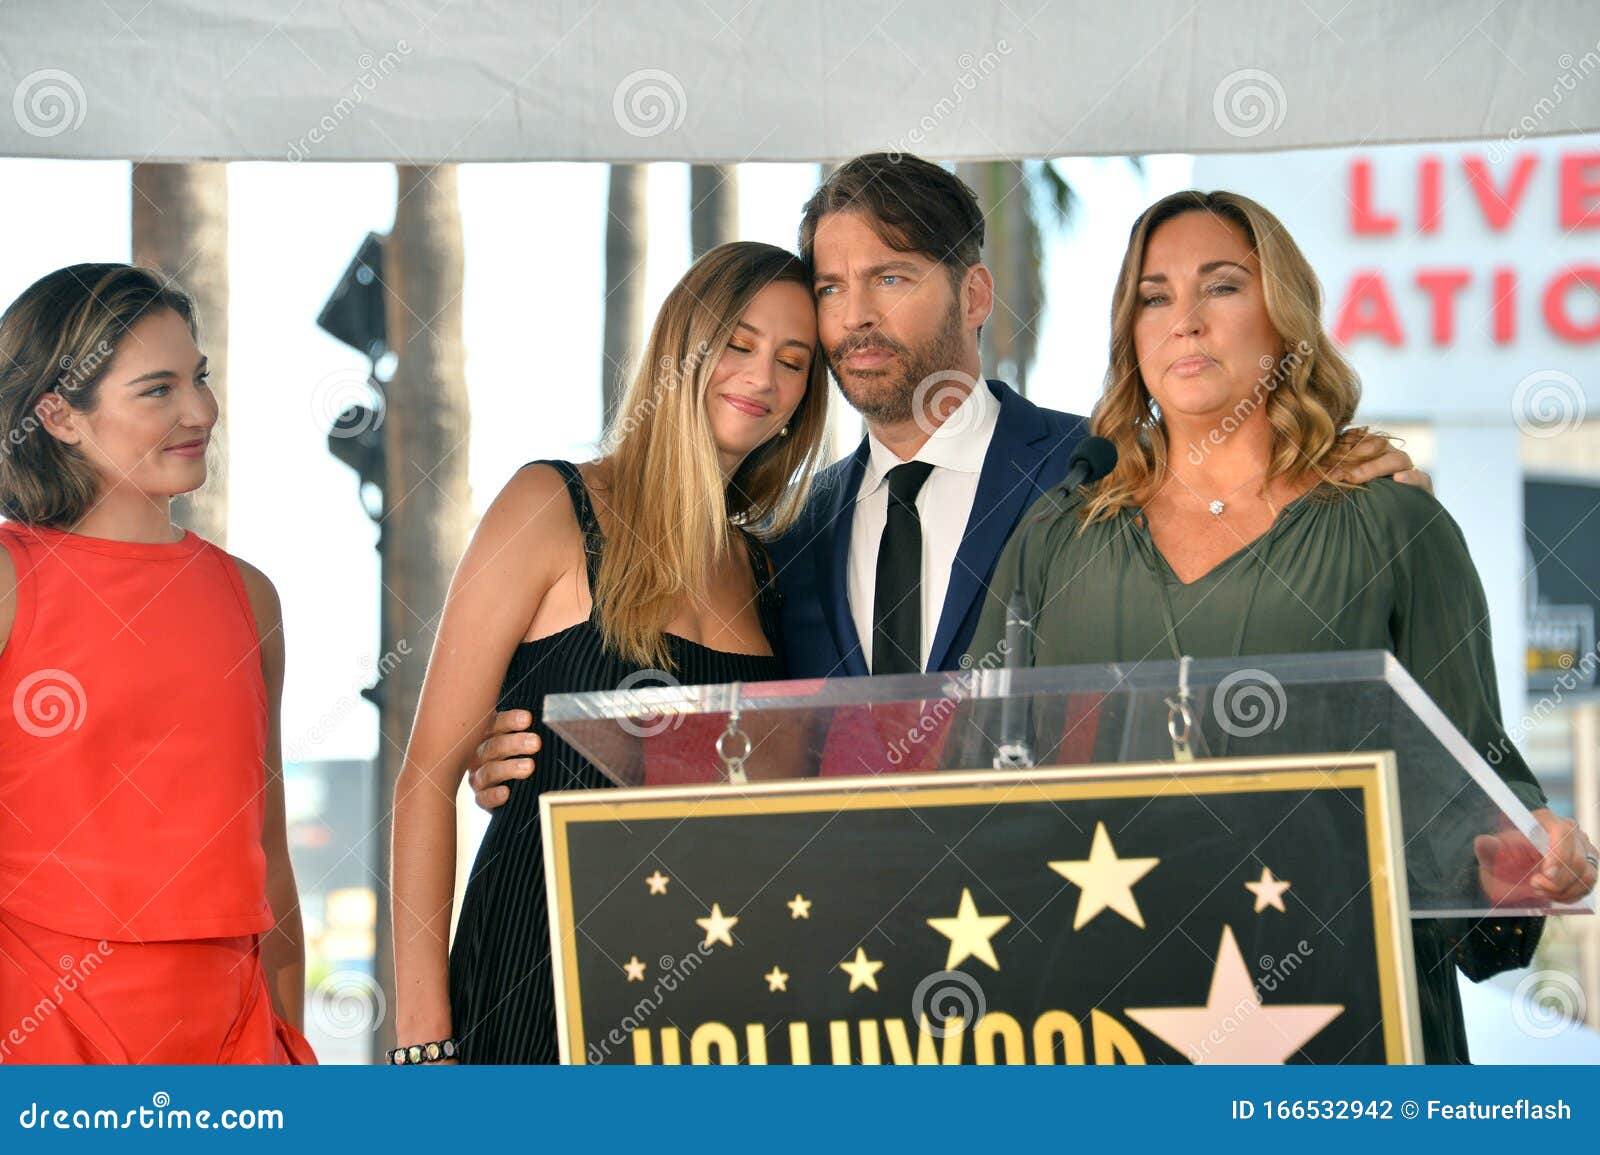 Sarah Connick, Georgia Connick, Harry Connick Jr. & Jill Goodacre Editorial Photography - Image of event, 166532942